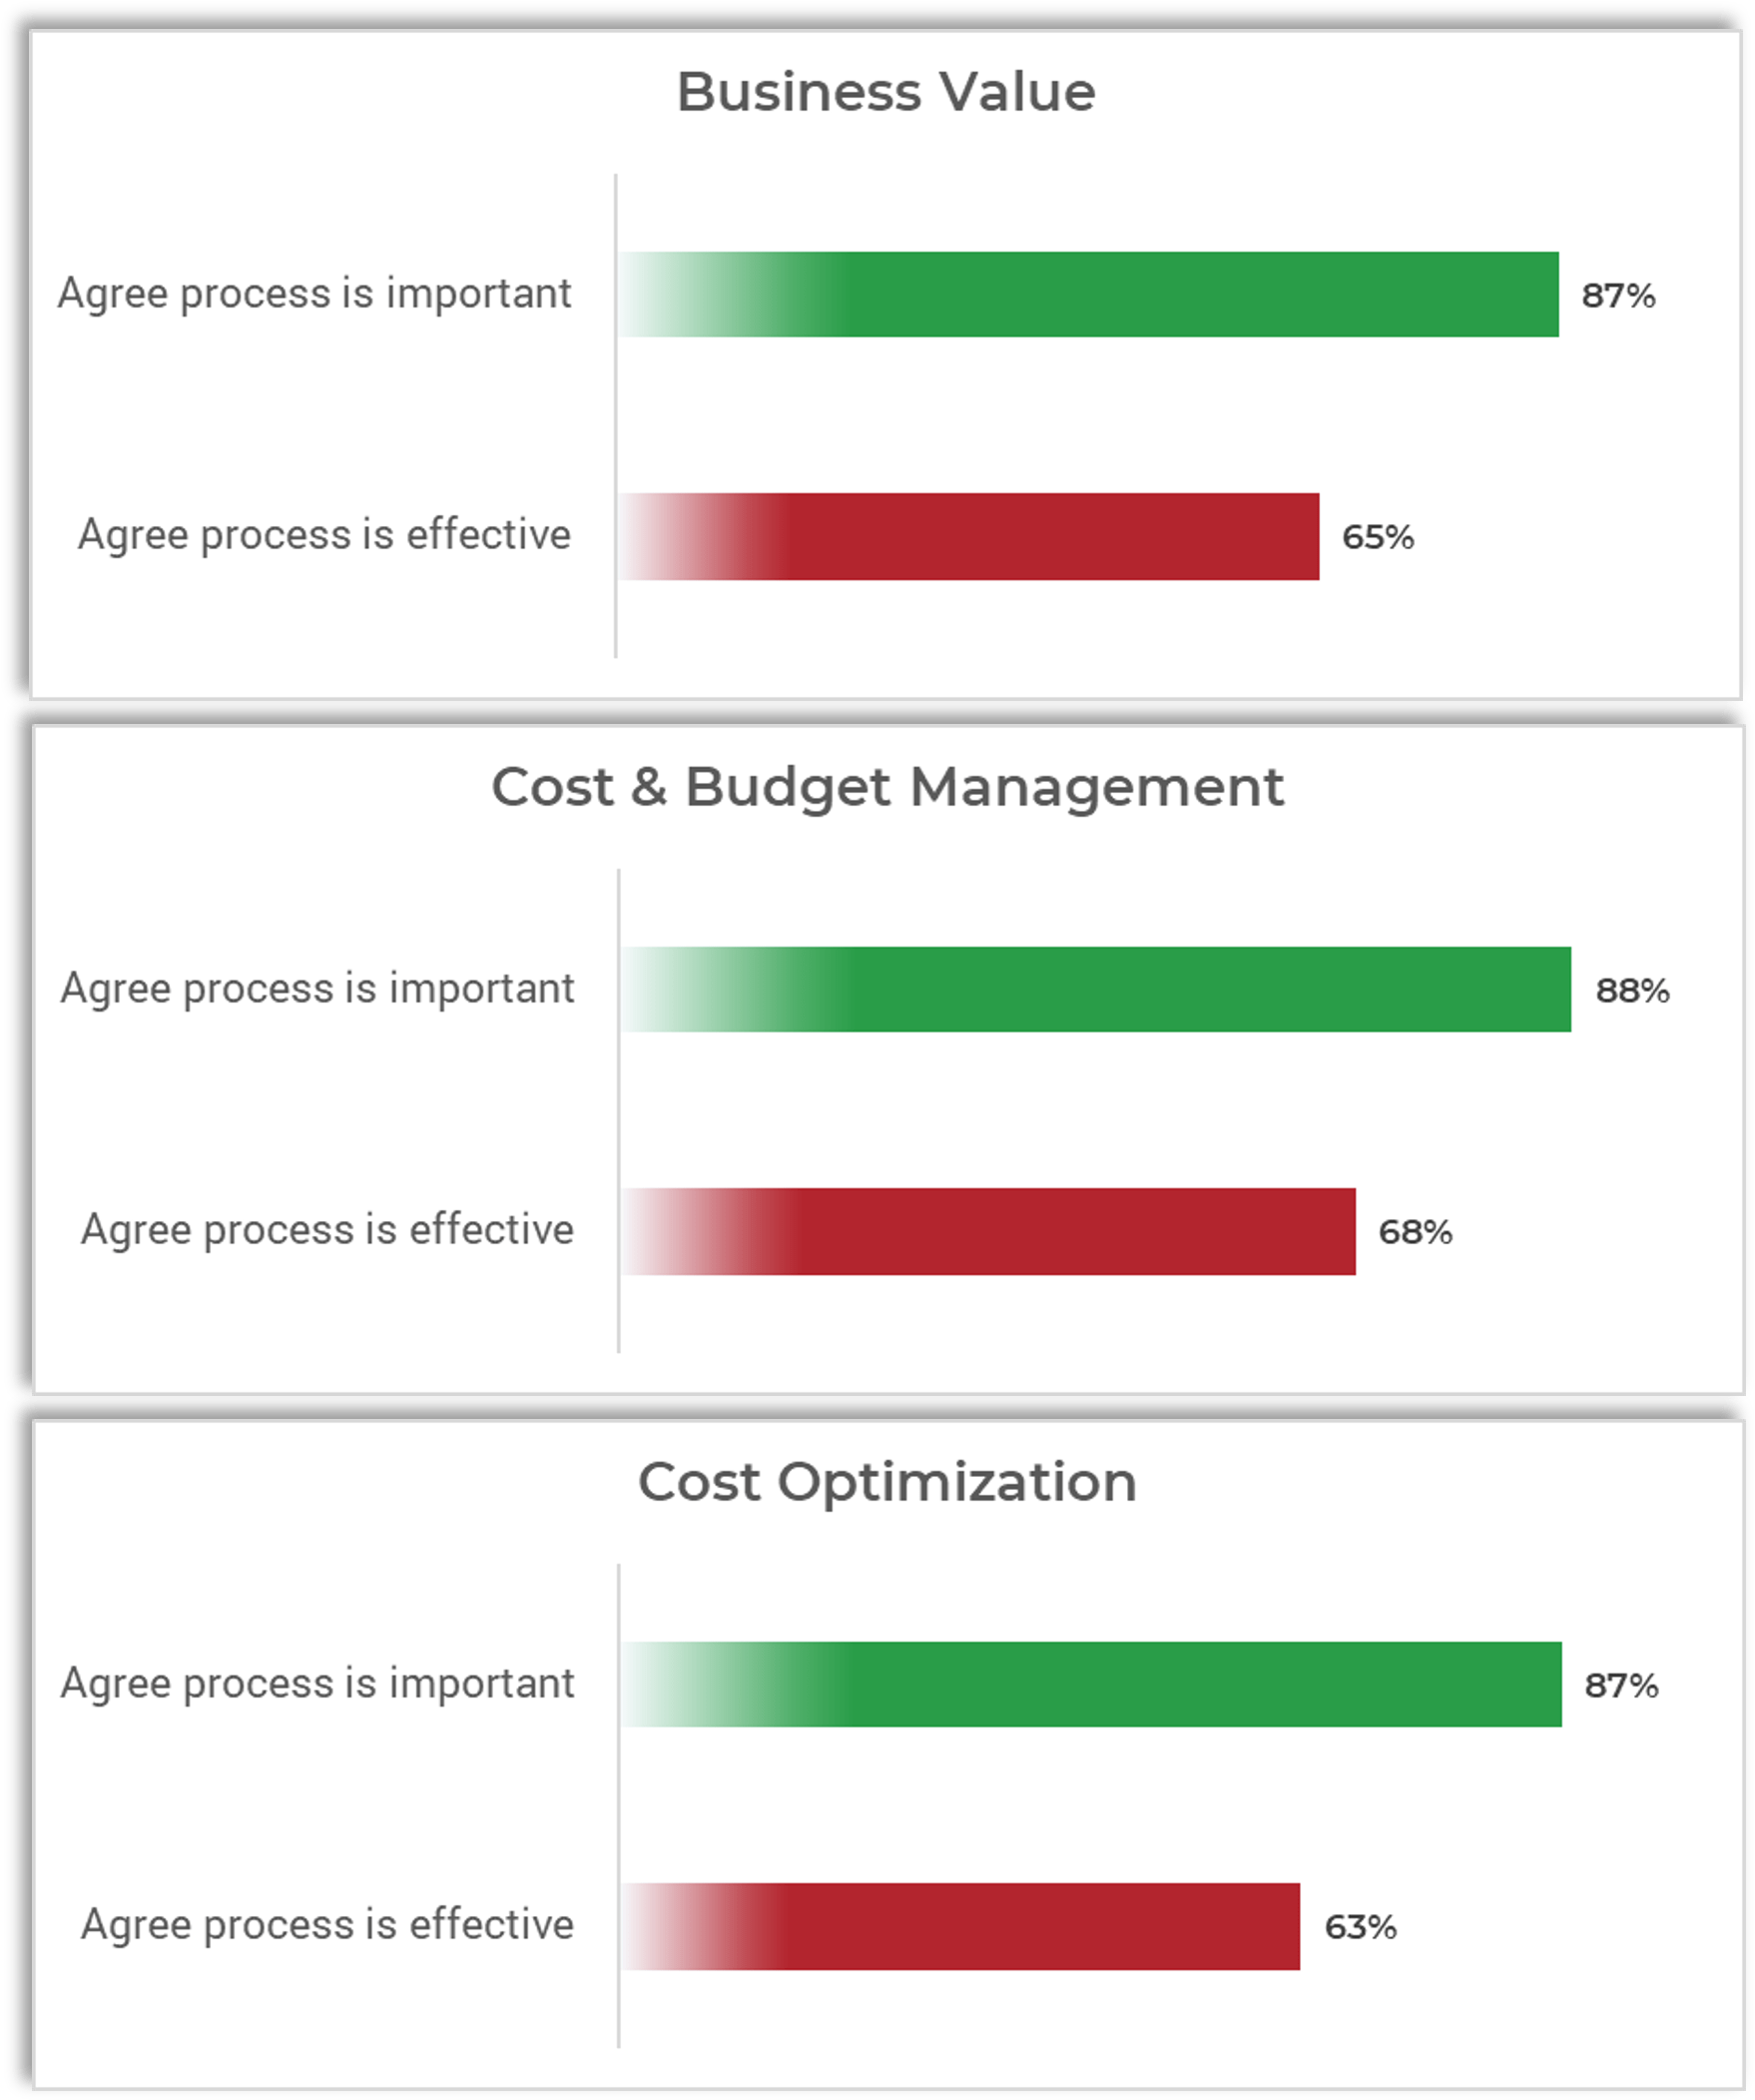 Bar charts comparing percentages of people who 'Agree process is important' and 'Agree process is effective' for three processes: Business Value, Cost & Budget Management, and Cost Optimization. In all instances, the importance outweighed the perceived effectiveness.